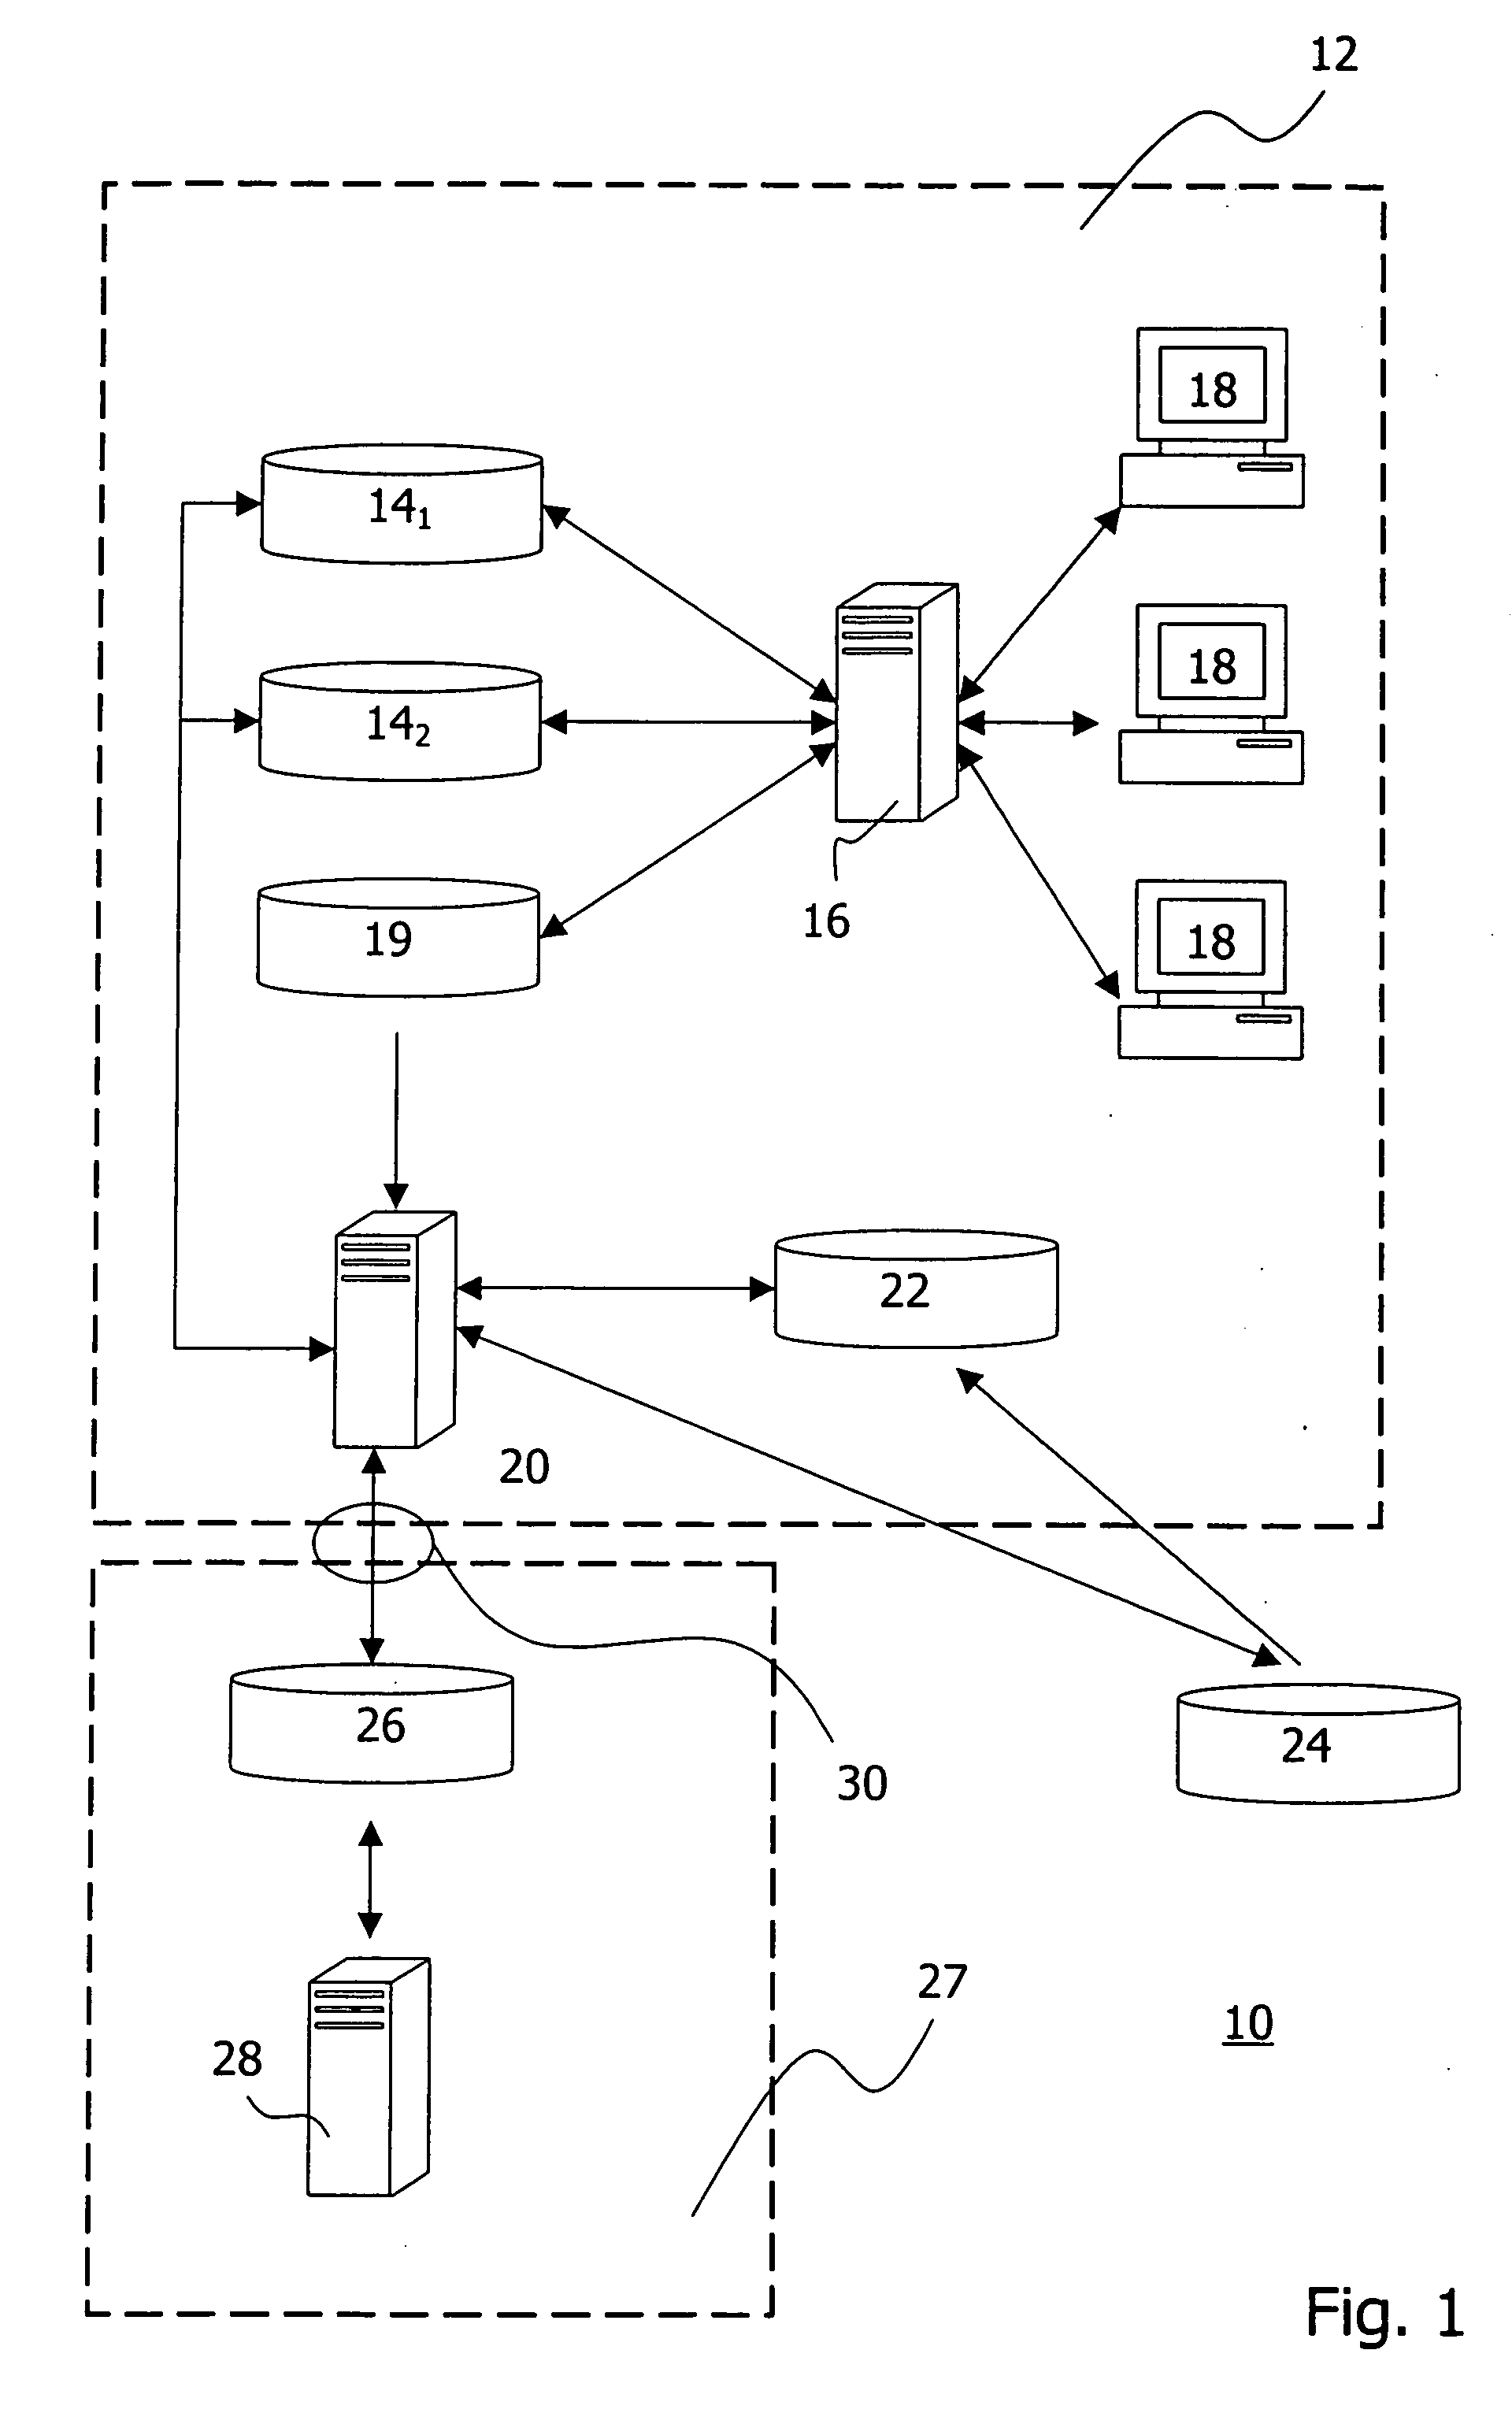 Generation of anonymized data records from productive application data